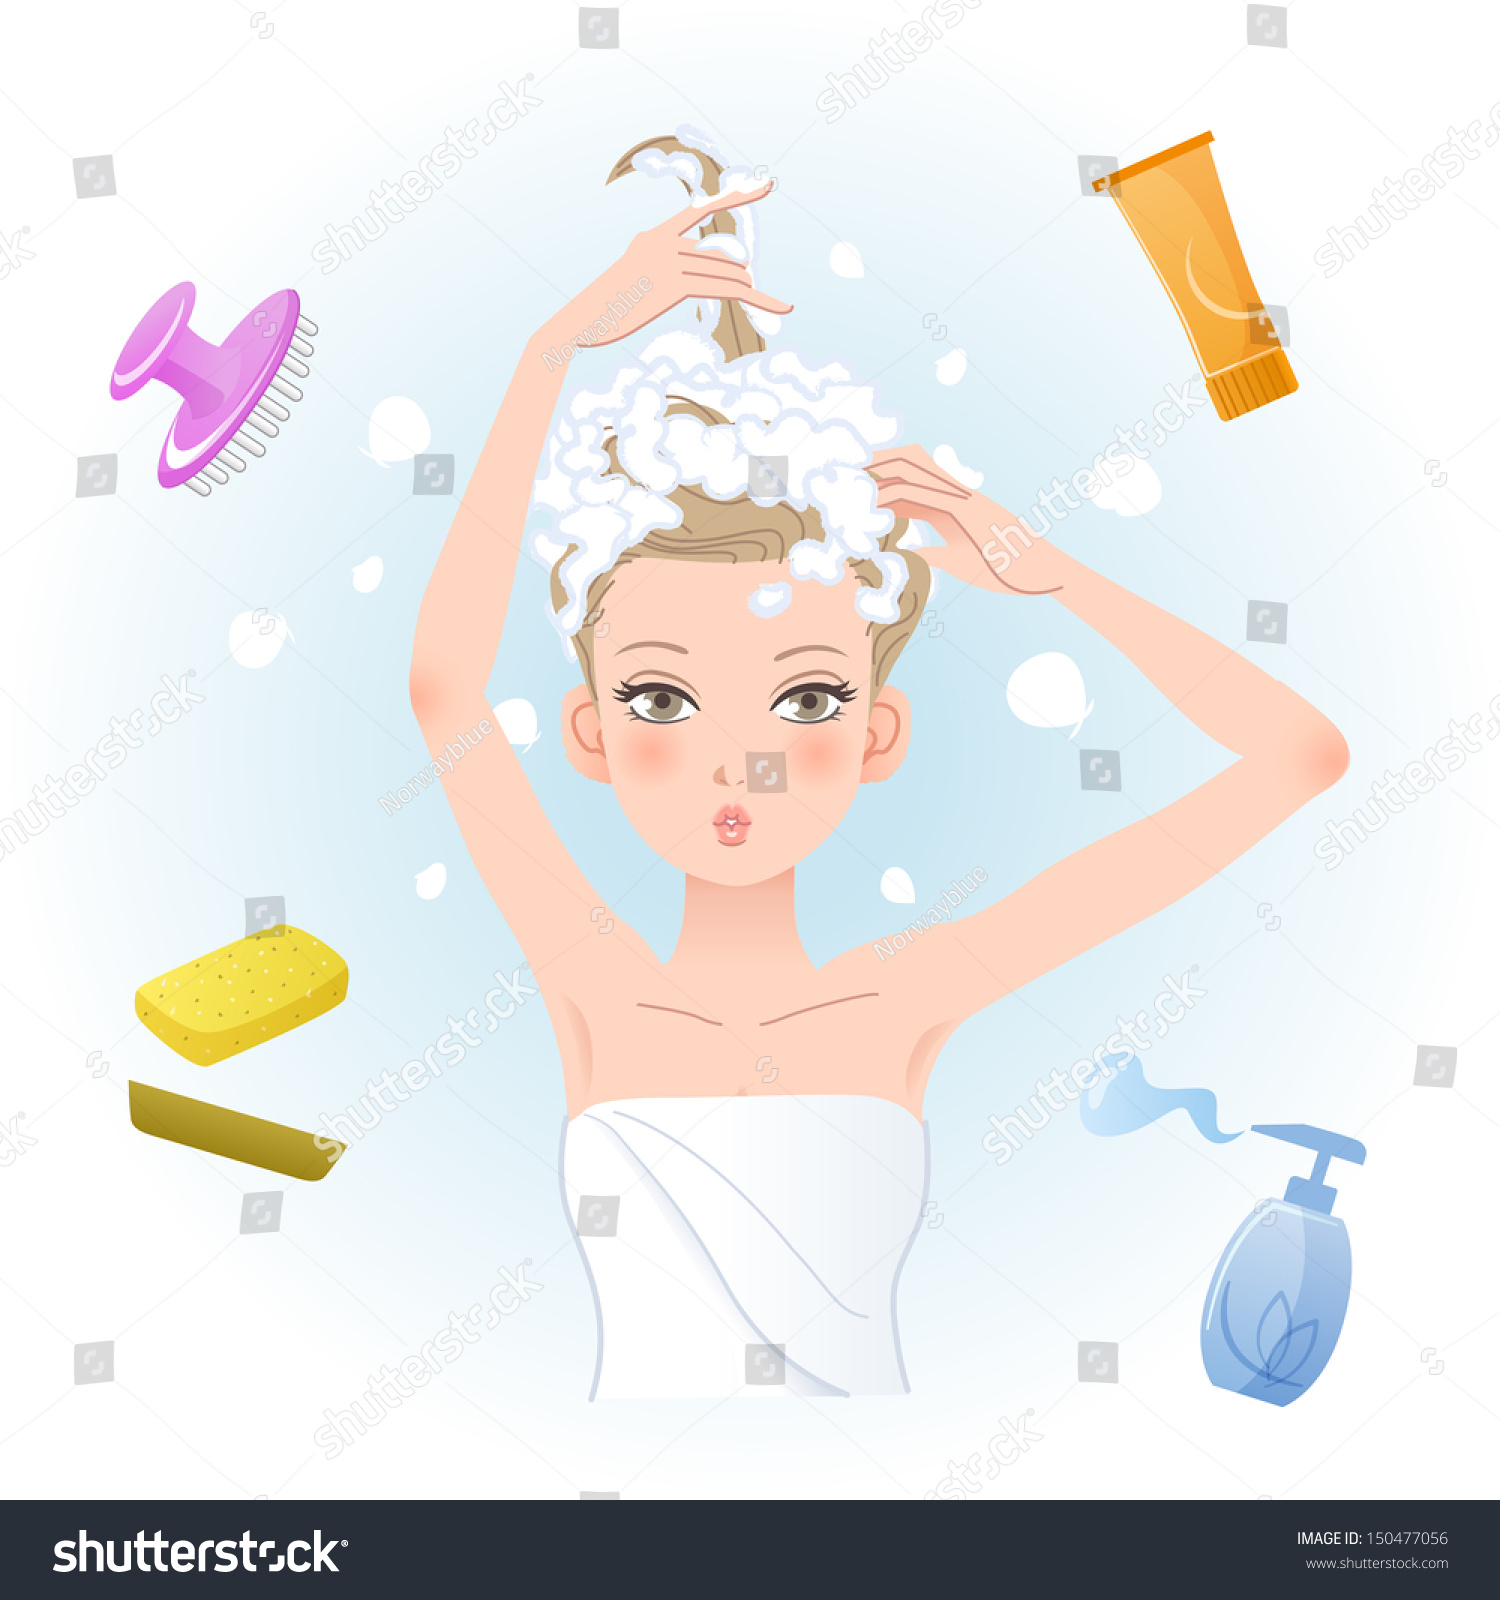 Young Woman Soaping Her Hair With Body/Hair Care Products. Funny ...